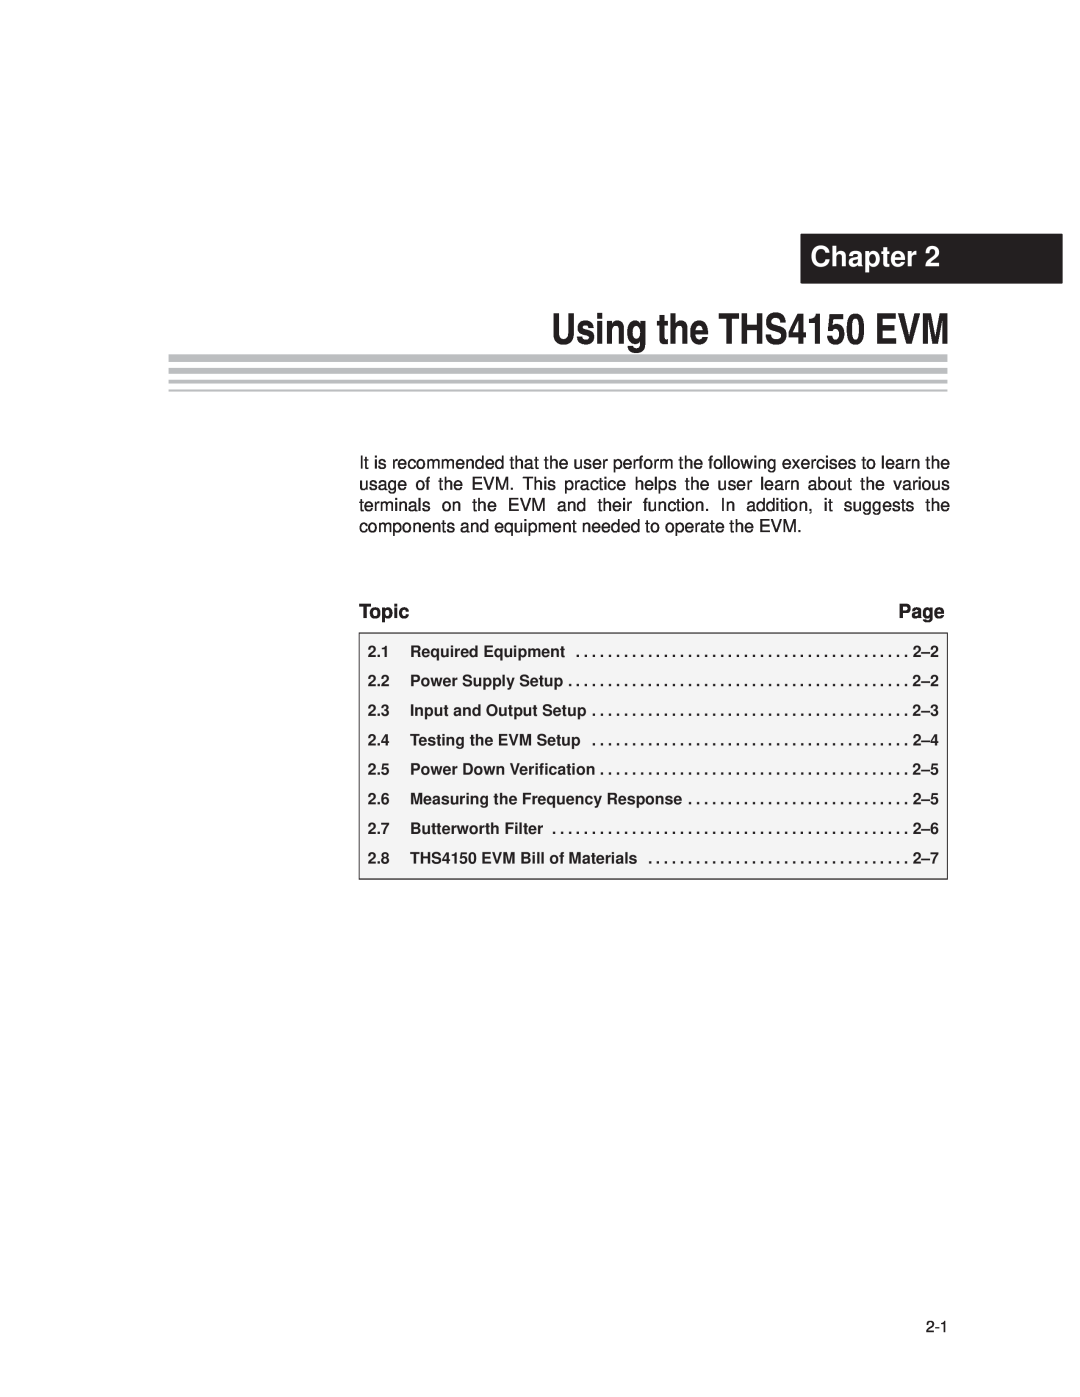 Texas Instruments manual Using the THS4150 EVM, Chapter, Page, Topic 